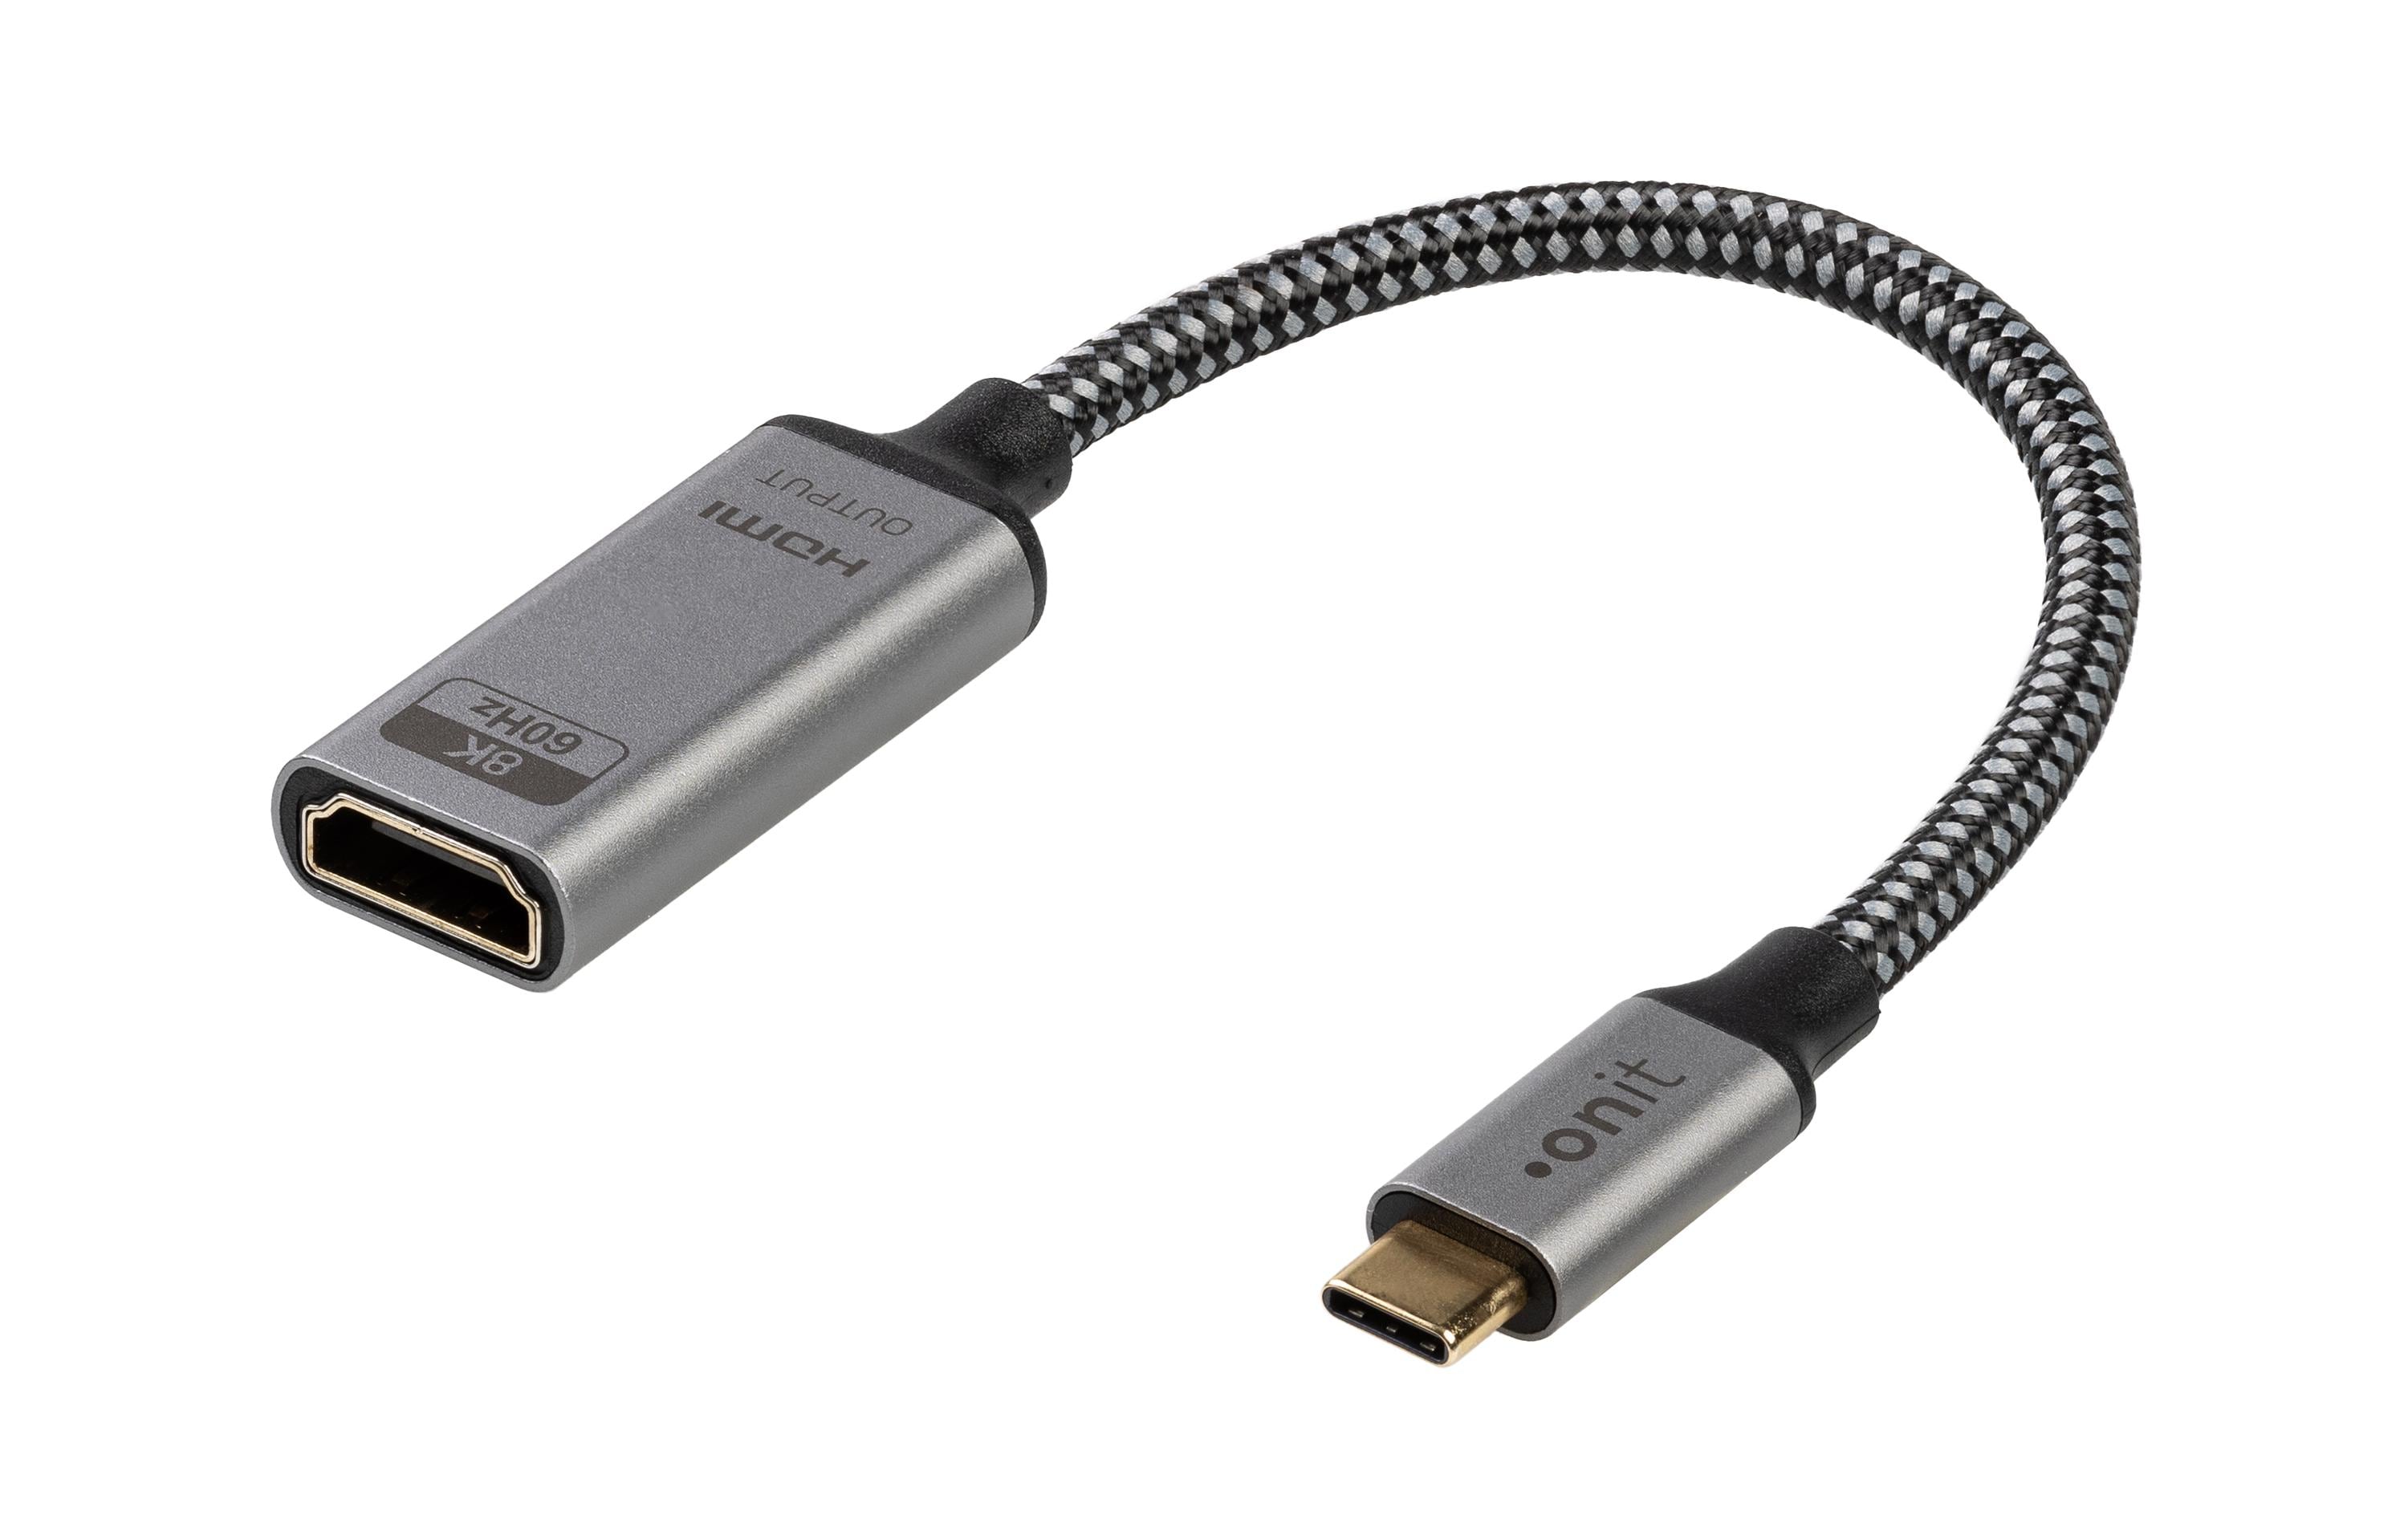 onit Adapter USB Type-C - HDMI